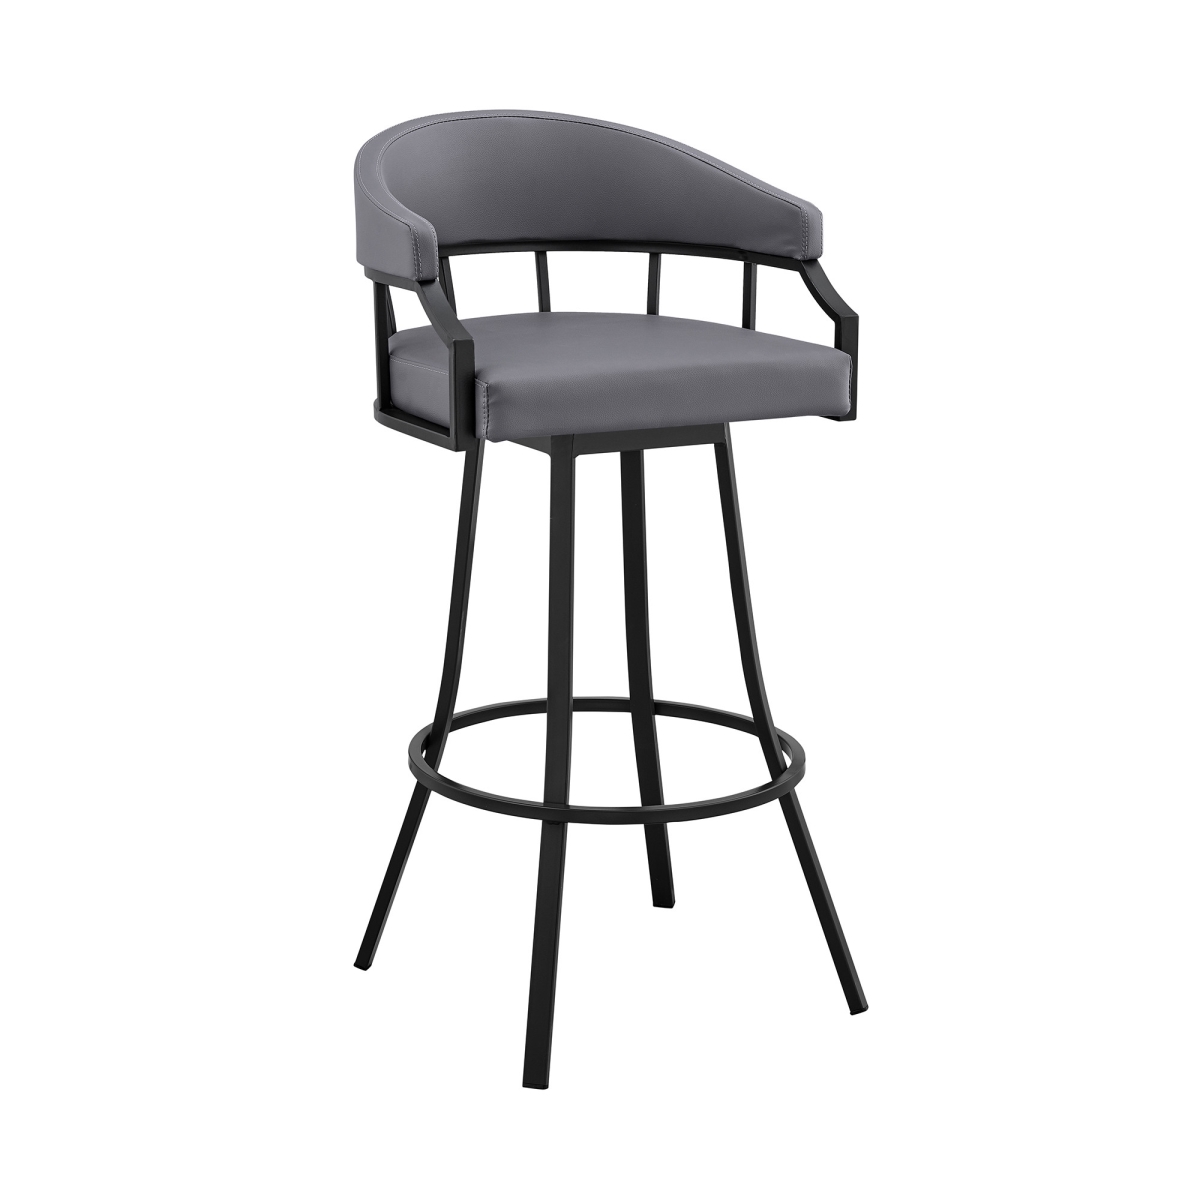 HomeRoots 476766 40 x 21 x 21 in. Slate Gray Faux Leather & Iron Swivel Low Back Bar Height Chair